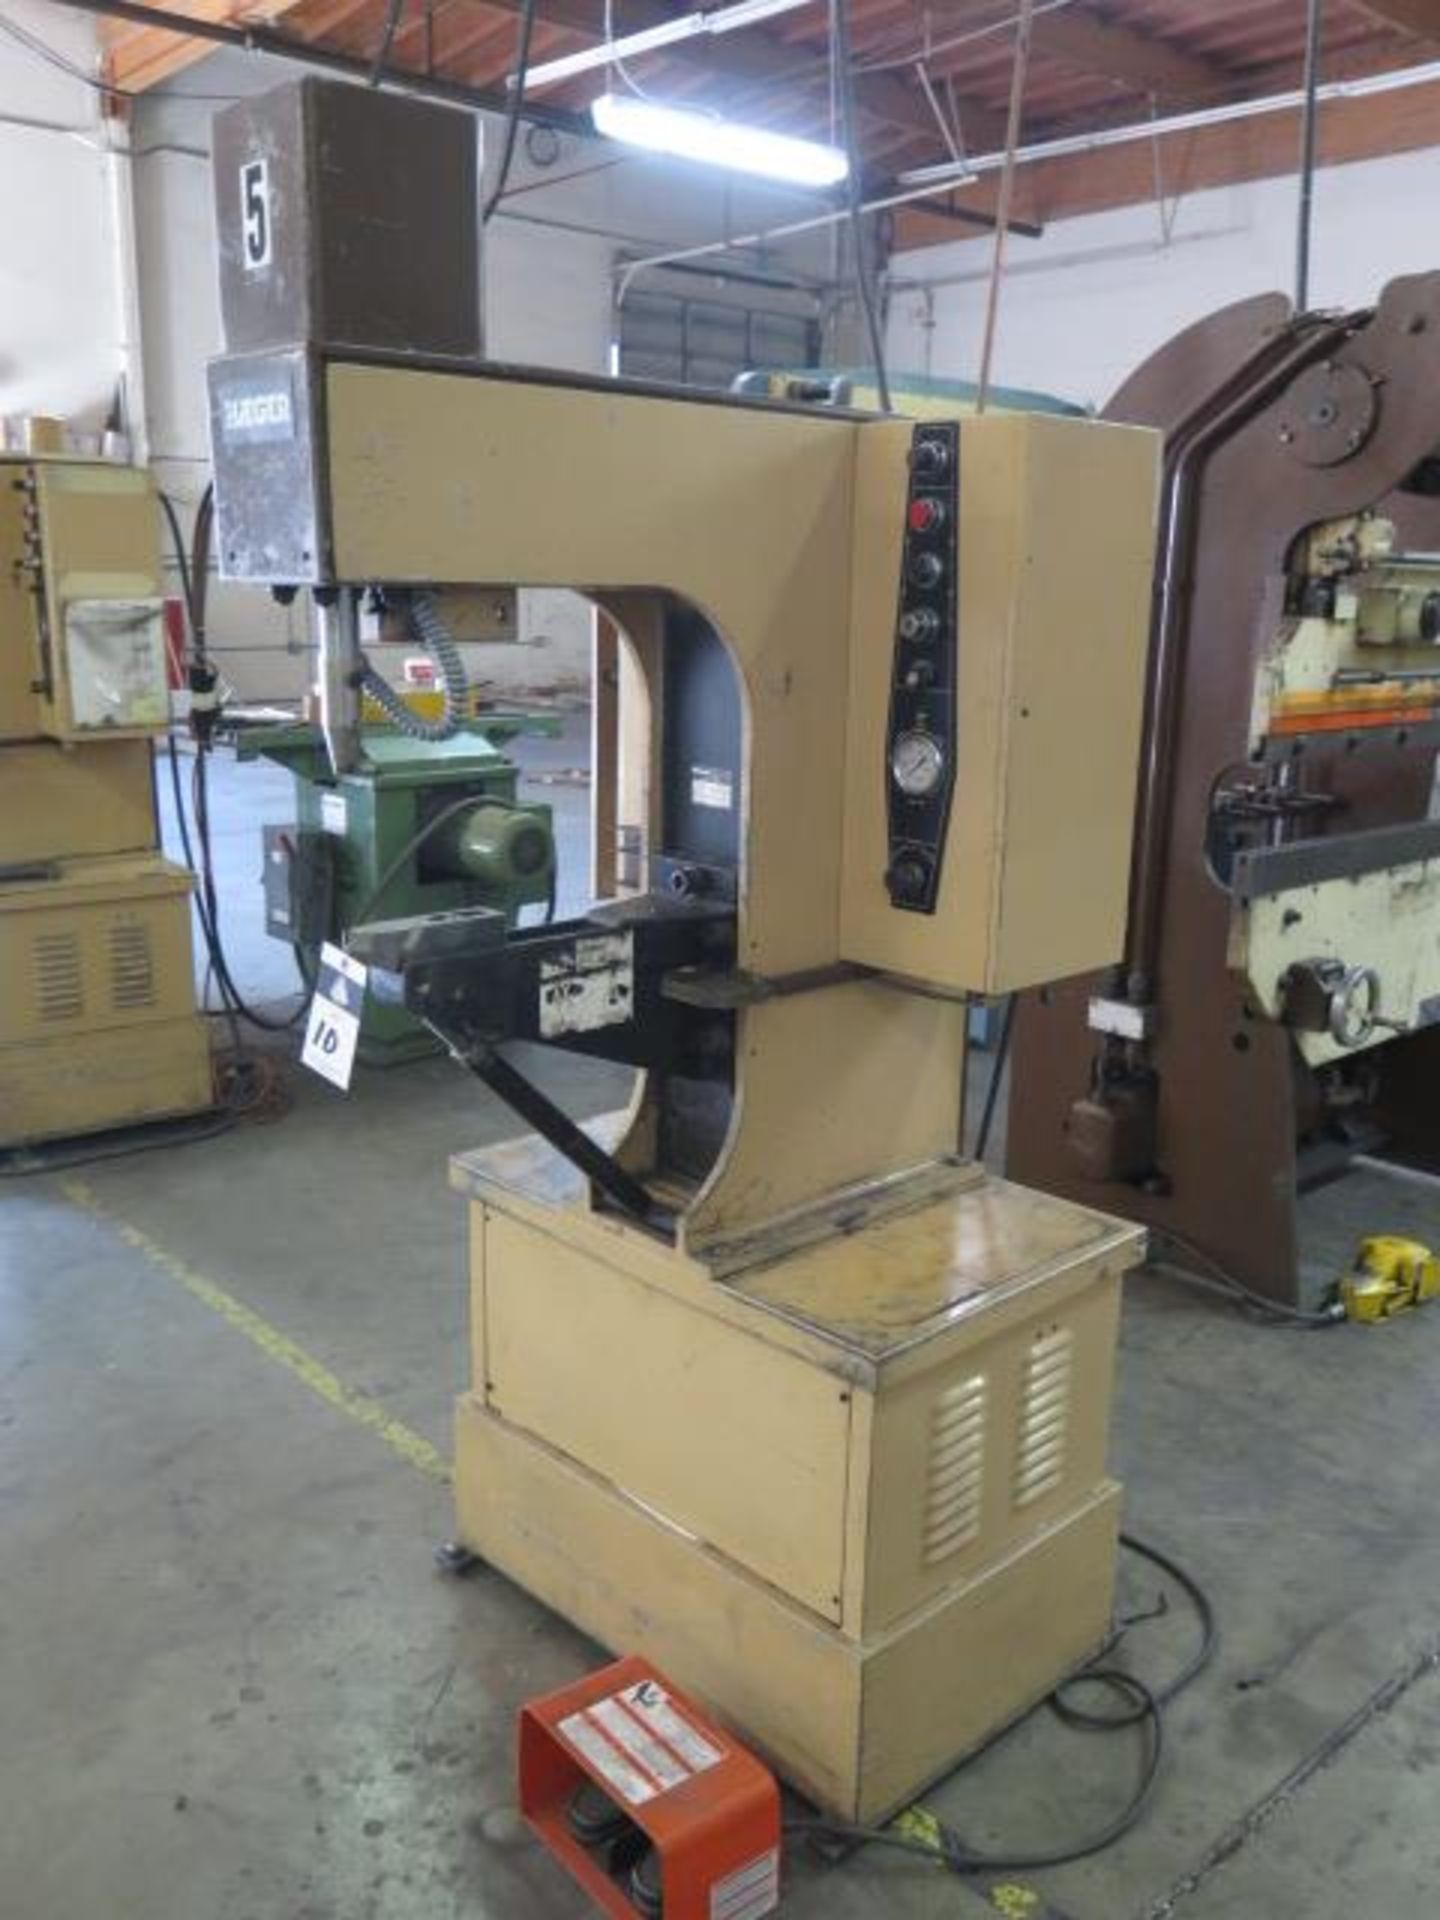 Haeger HP6-B 6 Ton x 18" Hardware Insertion Press s/n 684 (SOLD AS-IS - NO WARRANTY) - Image 2 of 9